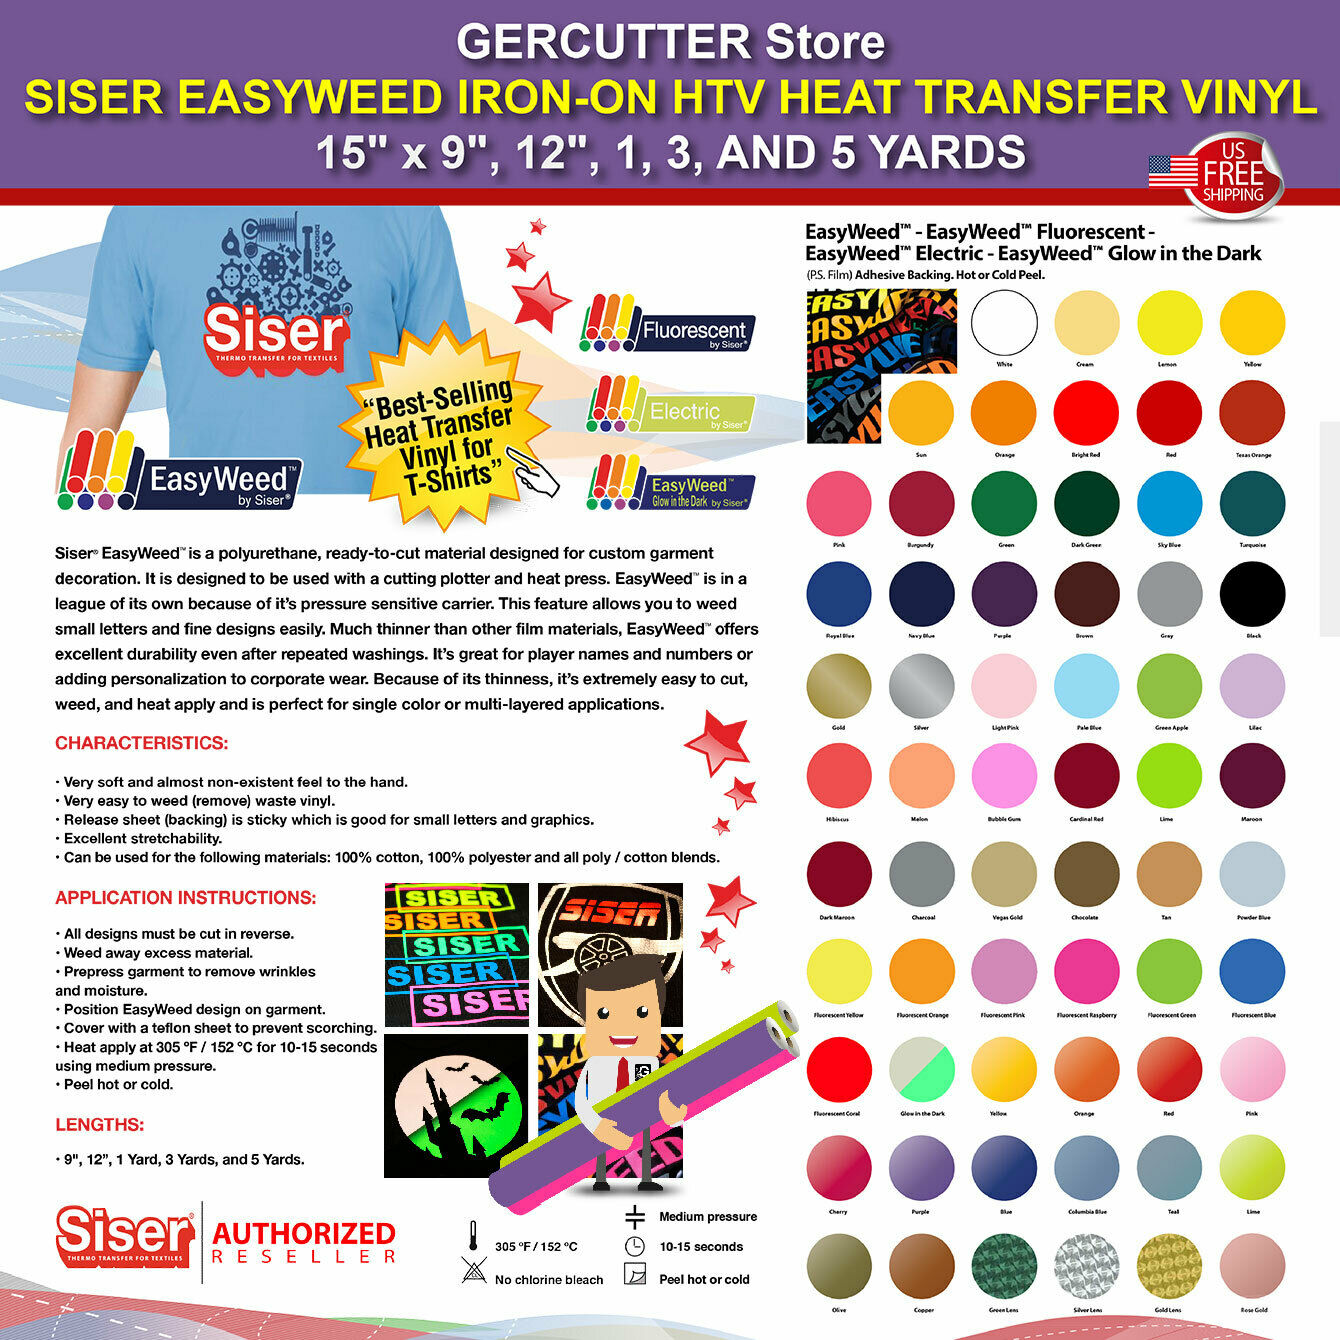 Siser Easyweed Iron-on Htv Heat Transfer Vinyl 15" X 9",12", 1, 3, And 5 Yards